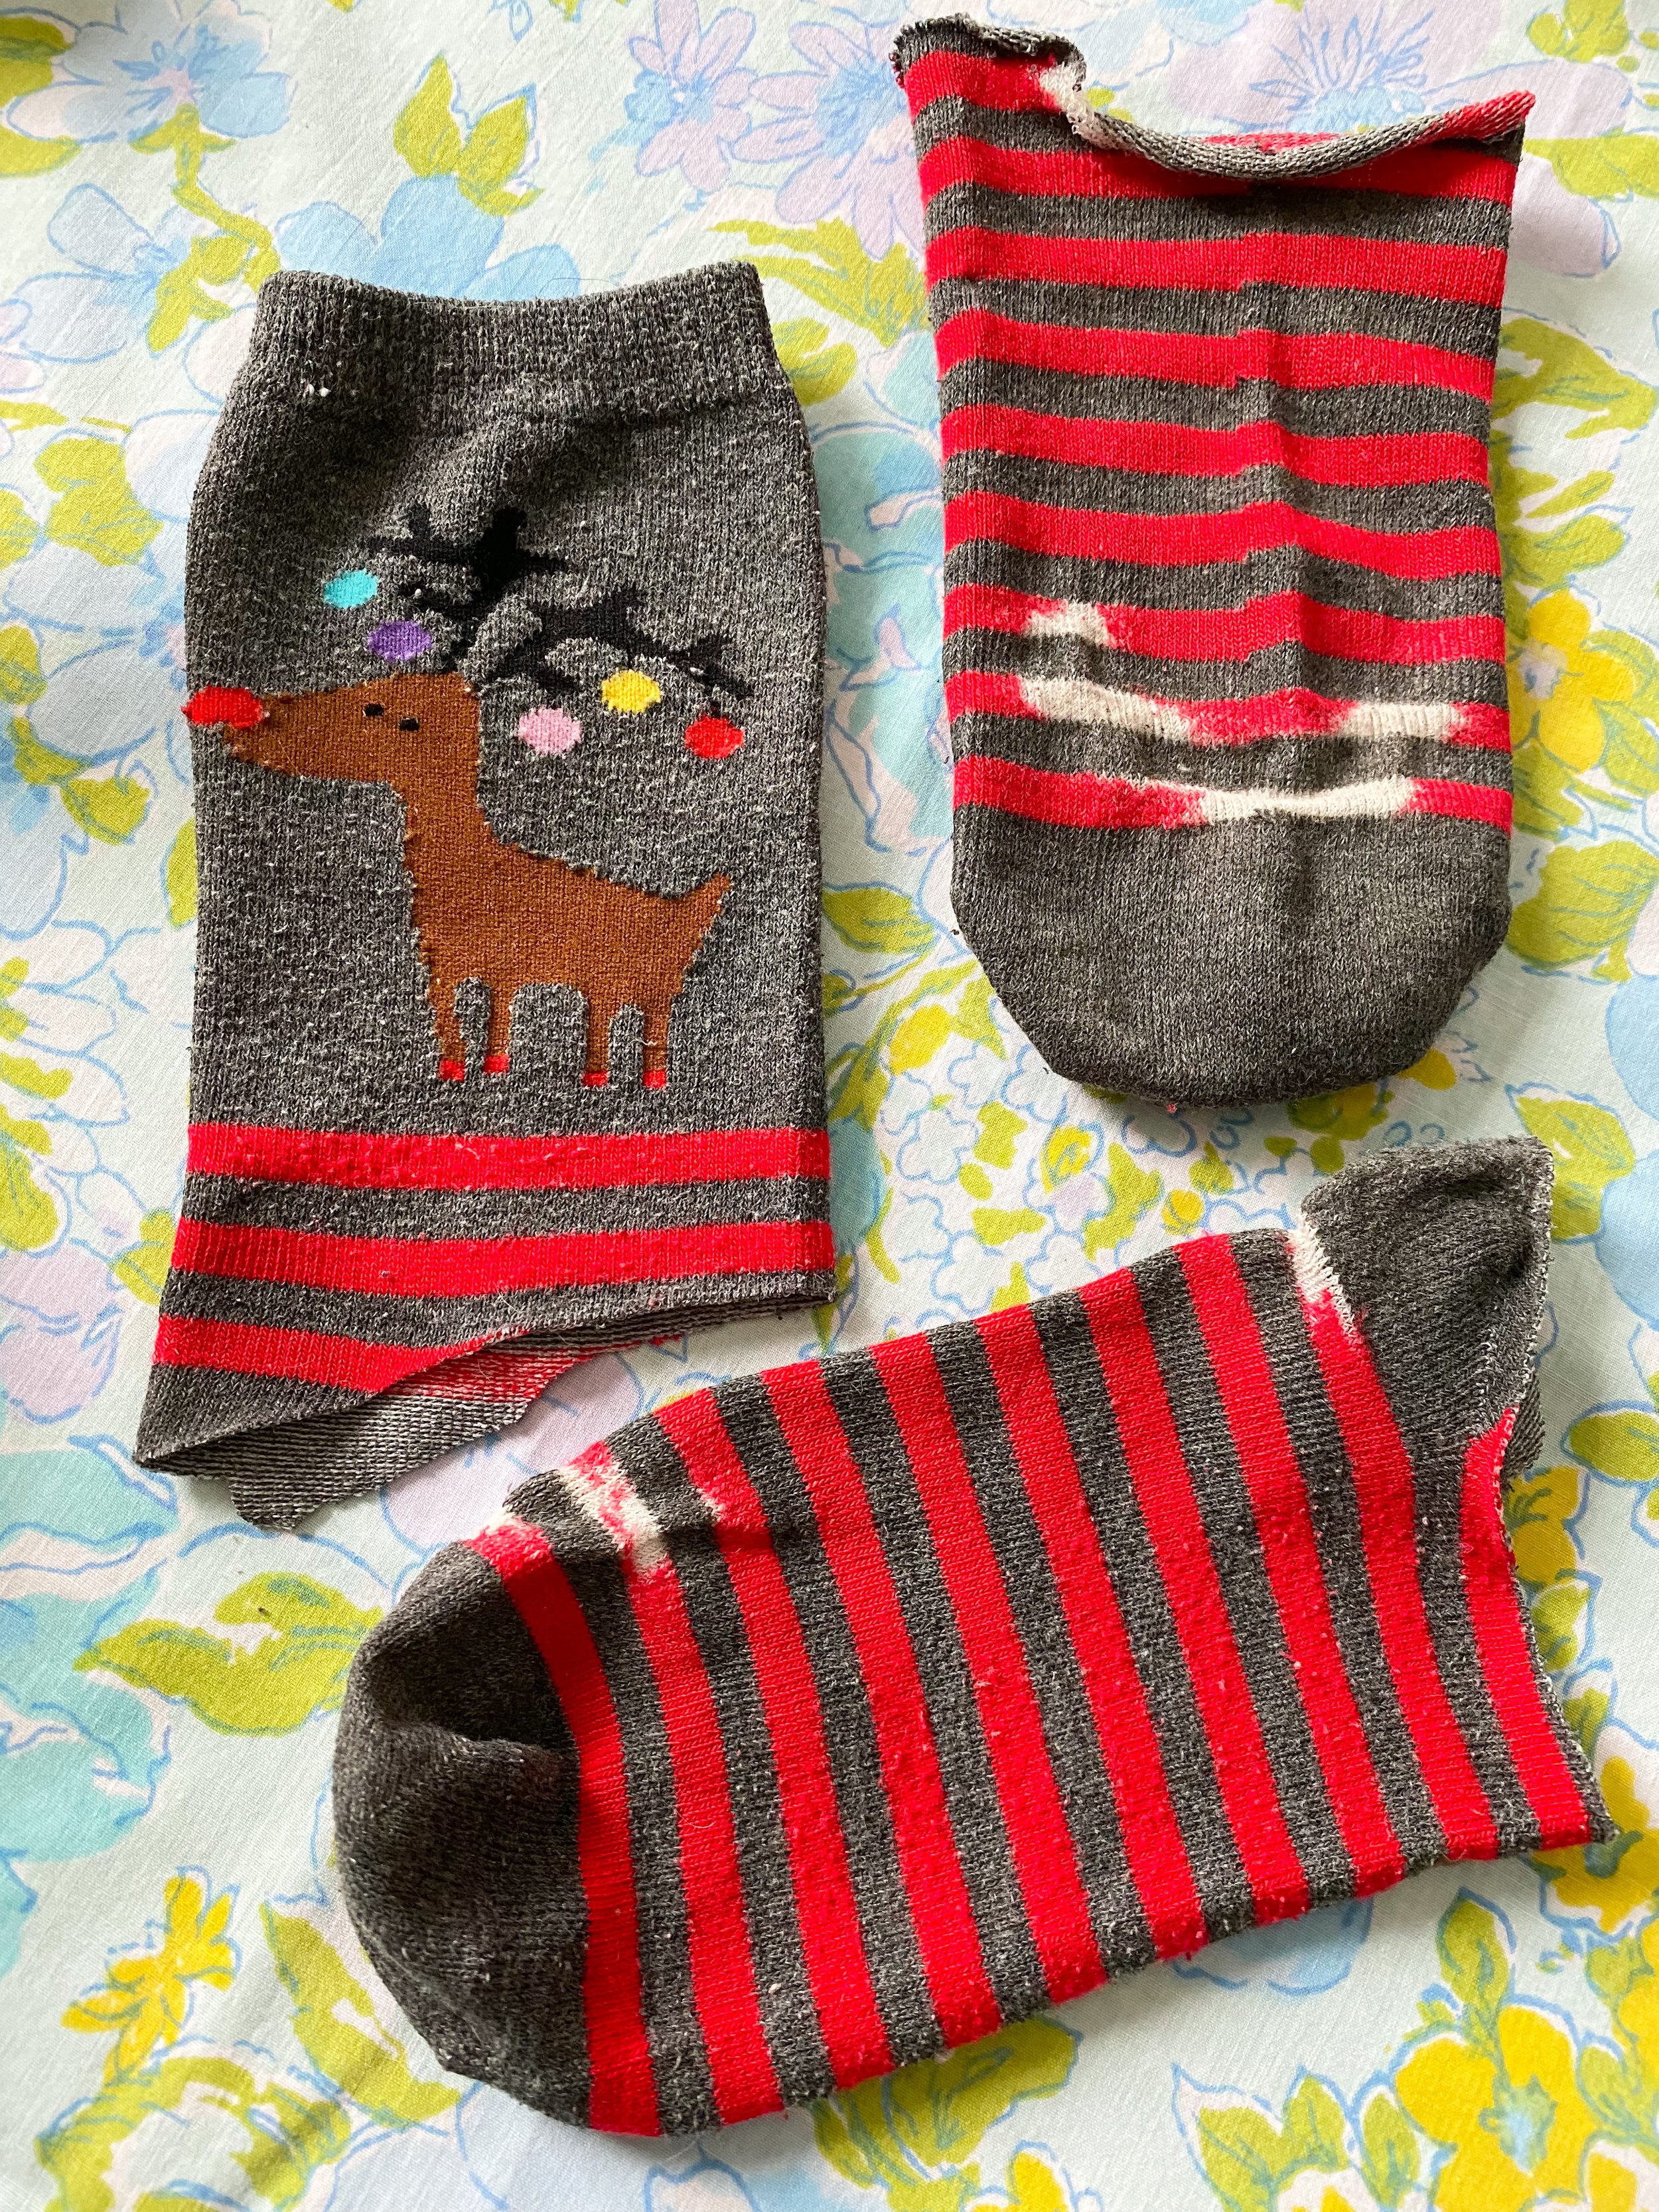 Crafts to use up old socks